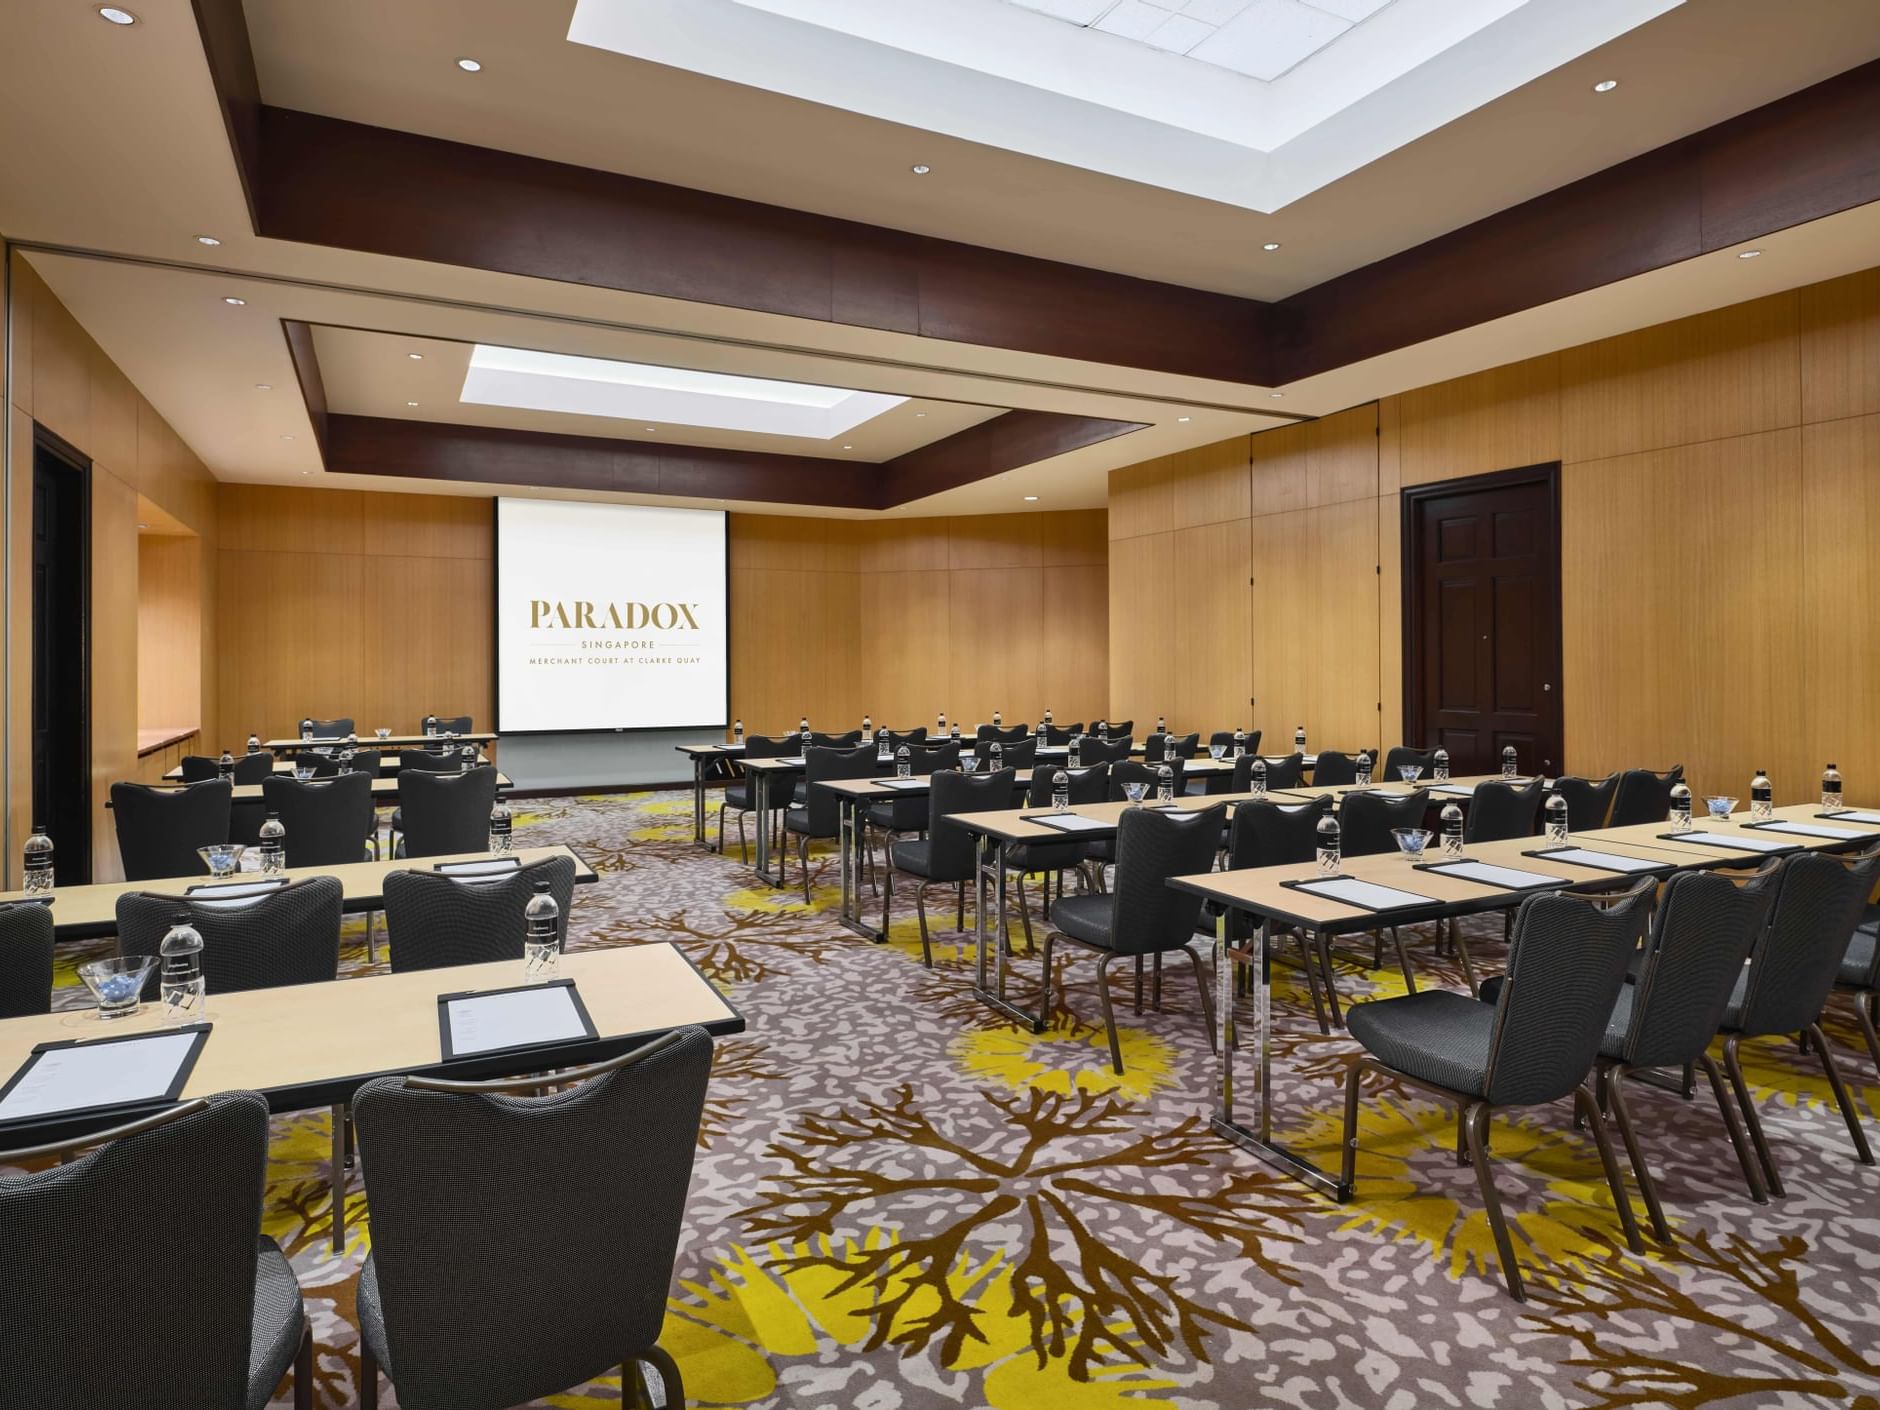 Classroom set-up in Rosewood Room at Paradox Singapore